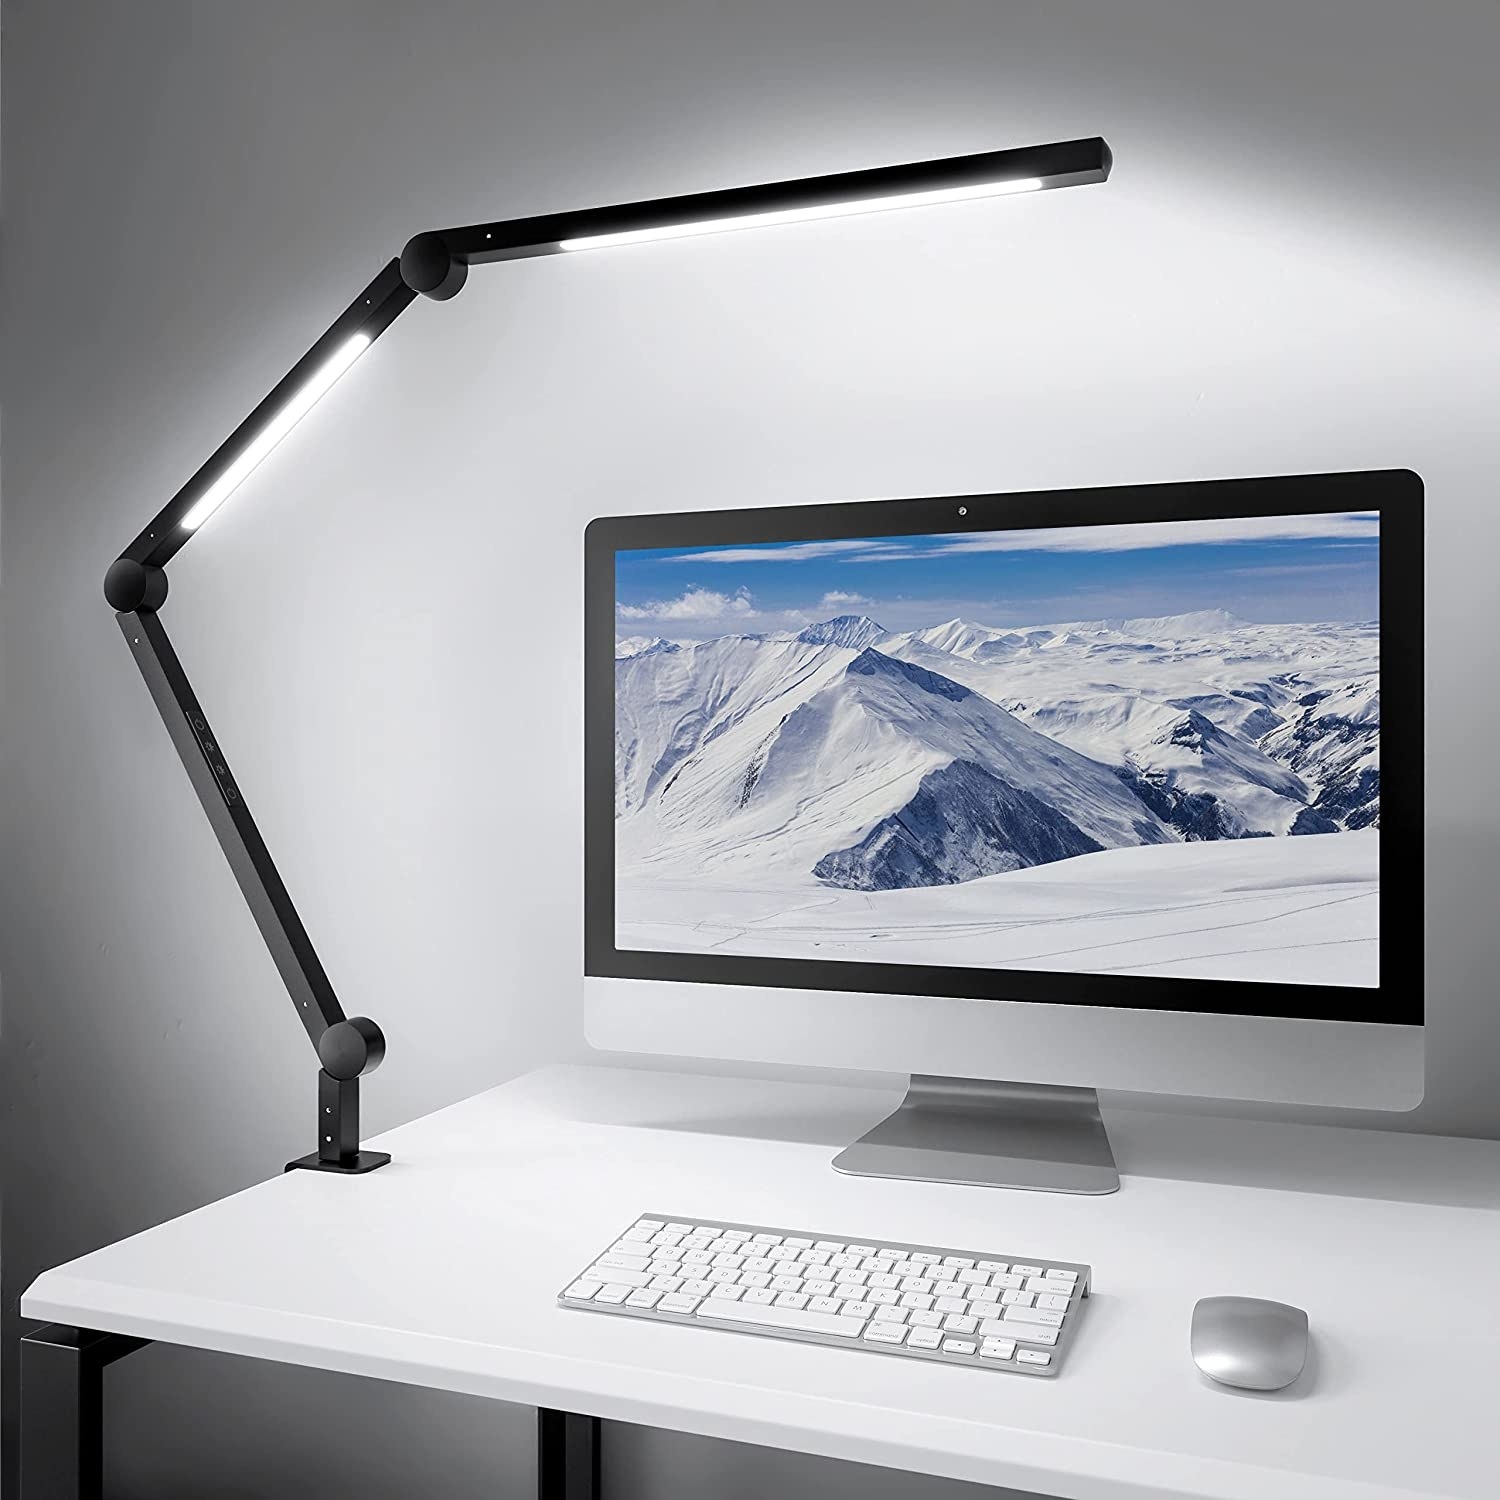 the bendable light bar attached to a desk